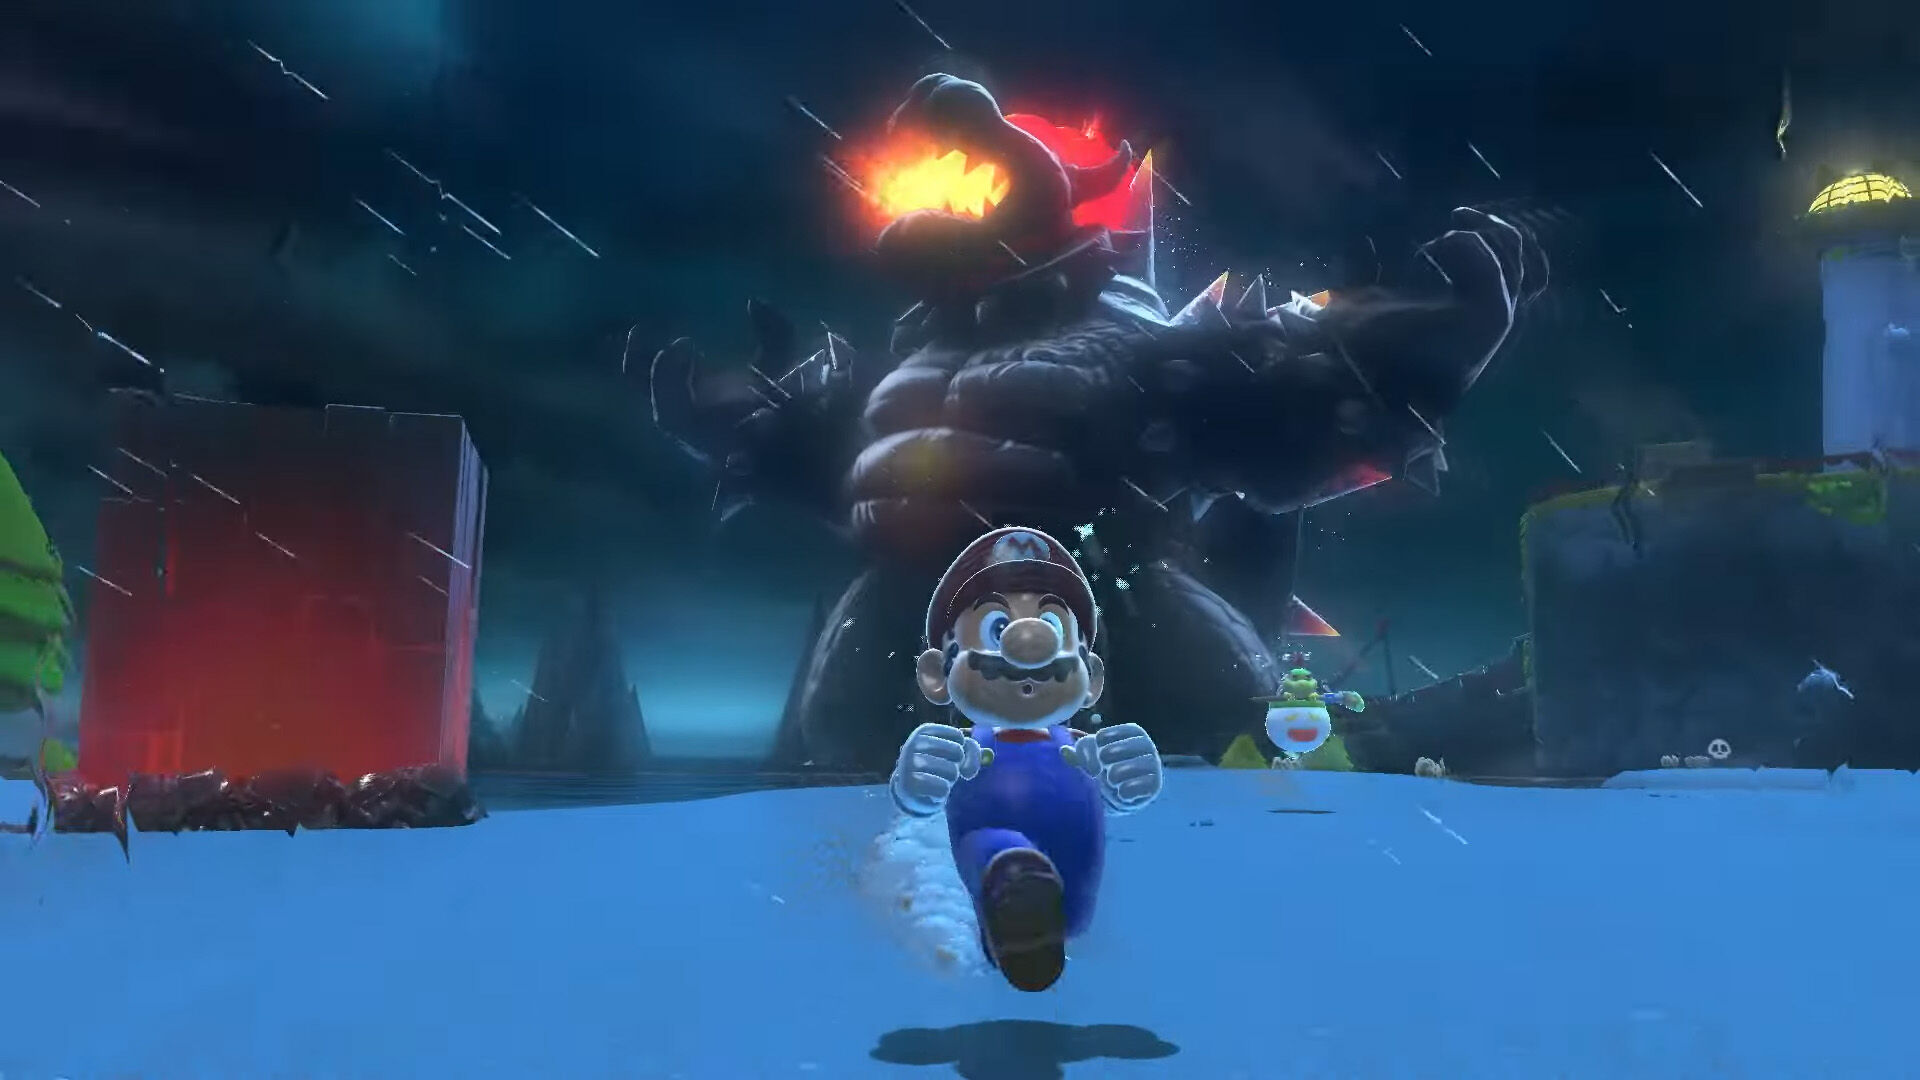 Super Mario 3D World + Bowser's Fury Frame Rate And Resolution Detailed